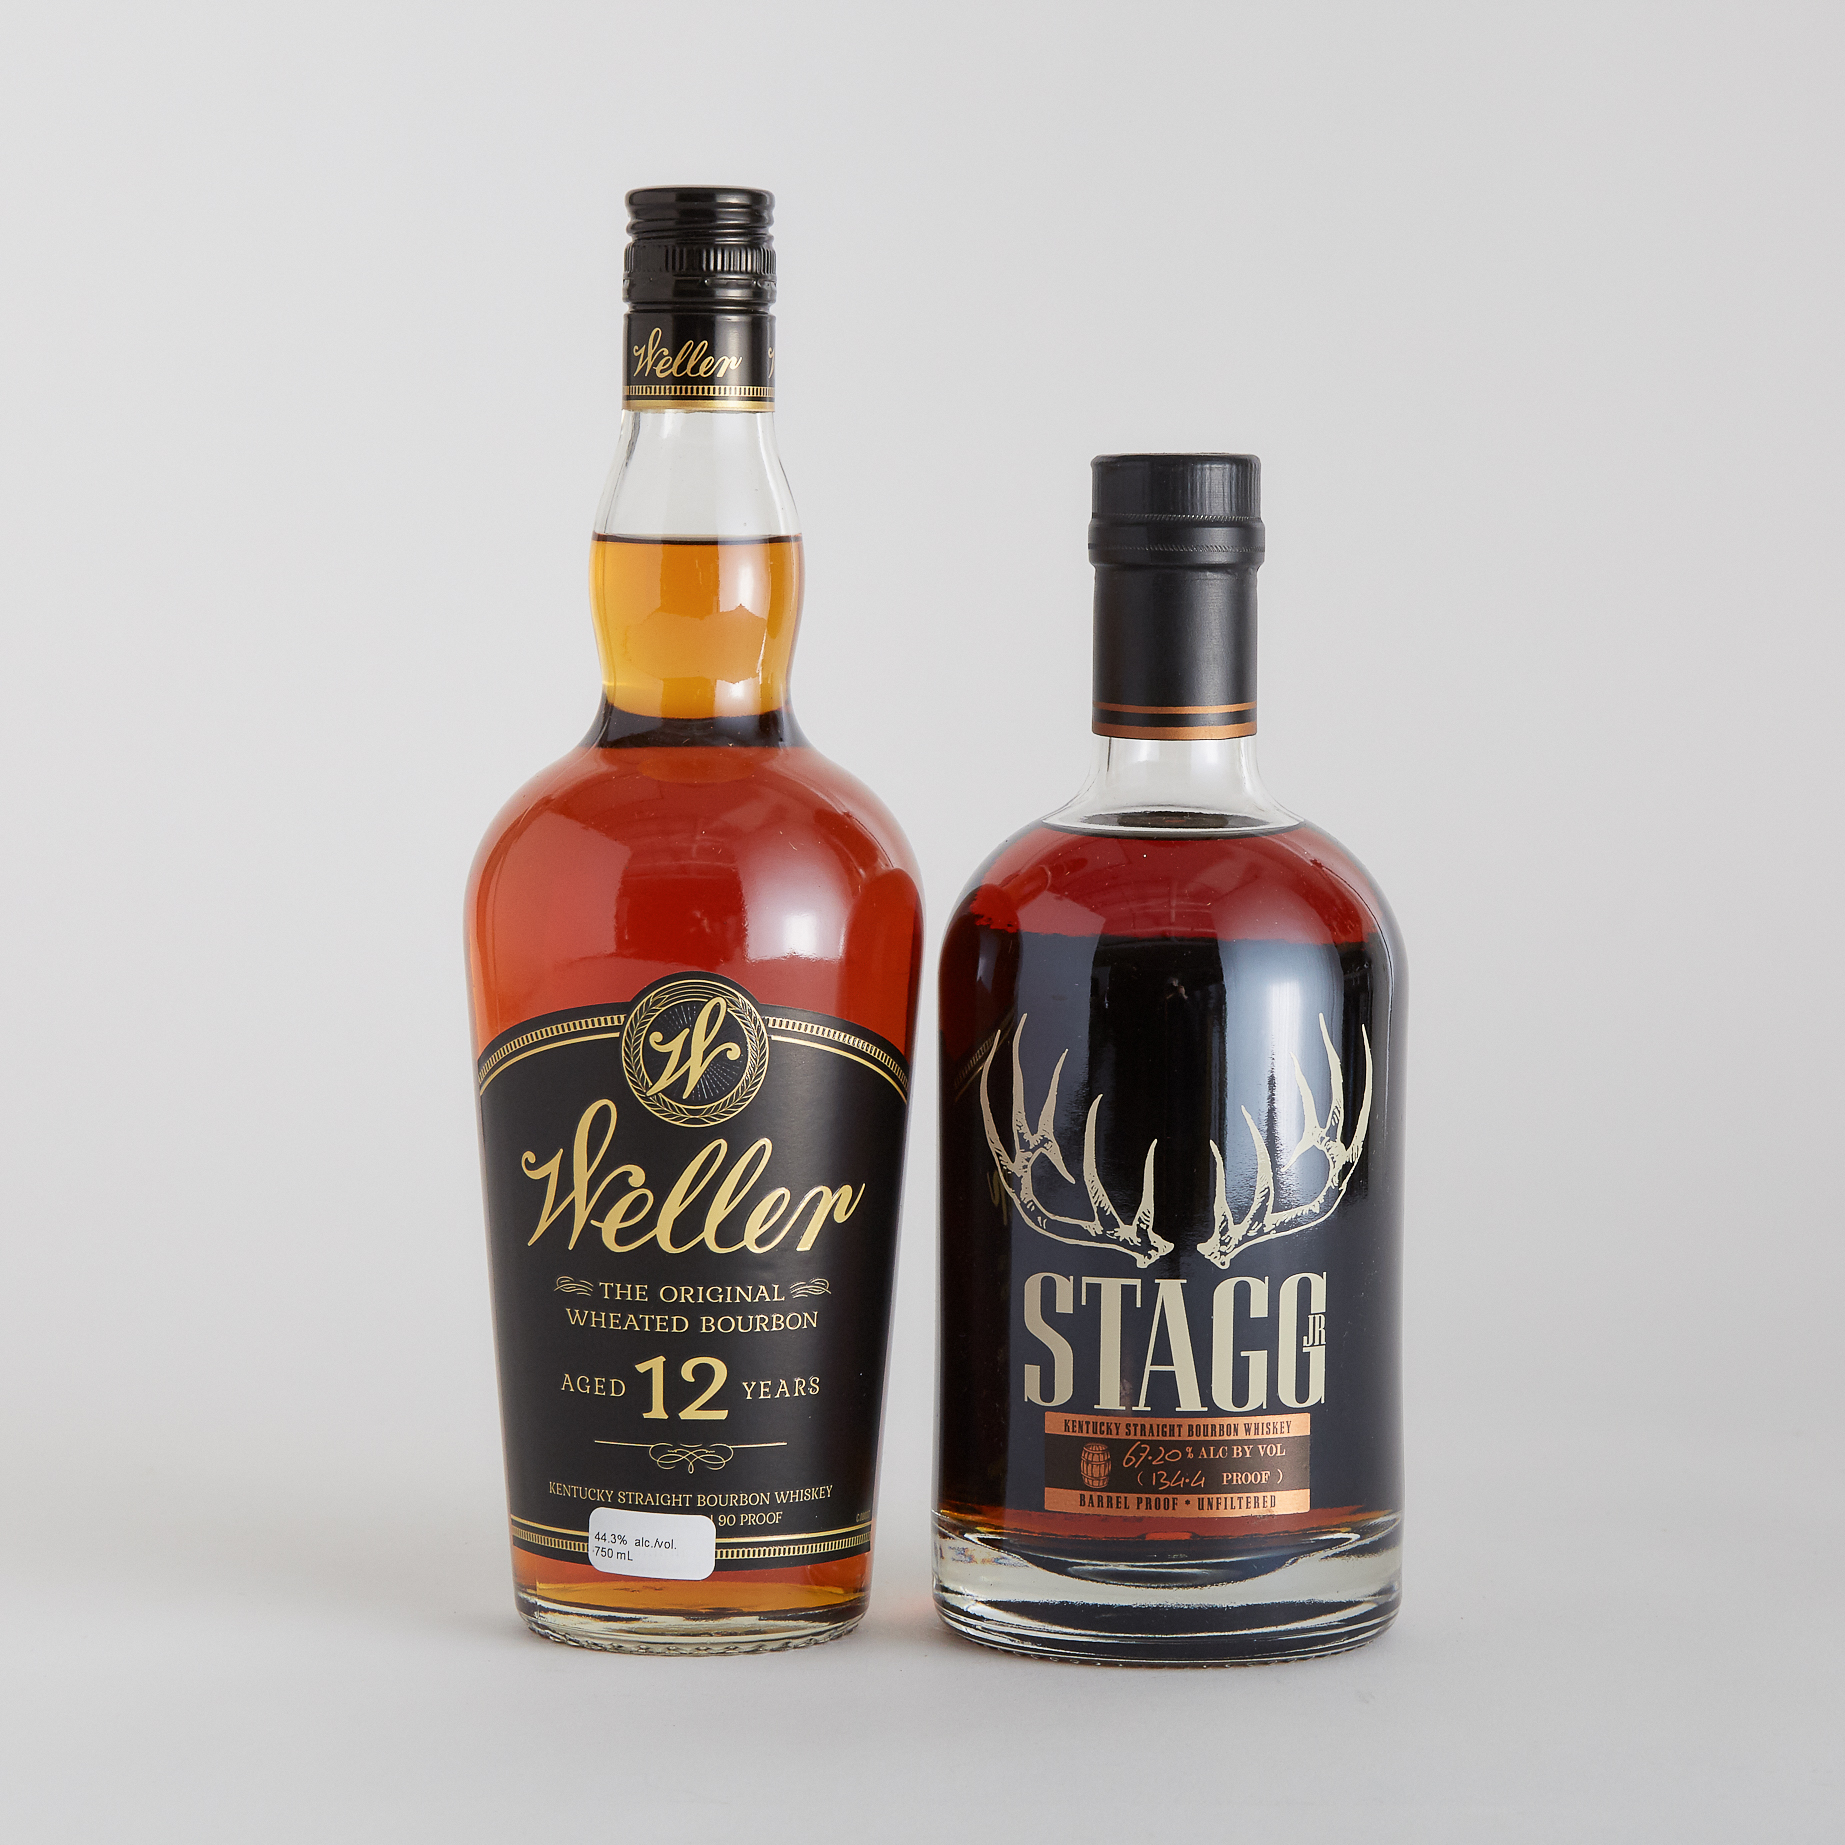 STAGG JR. KENTUCKY STRAIGHT BOURBON WHISKEY (ONE 750 ML)
WELLER KENTUCKY STRAIGHT BOURBON WHISKEY 12 YEARS (ONE 750 ML)